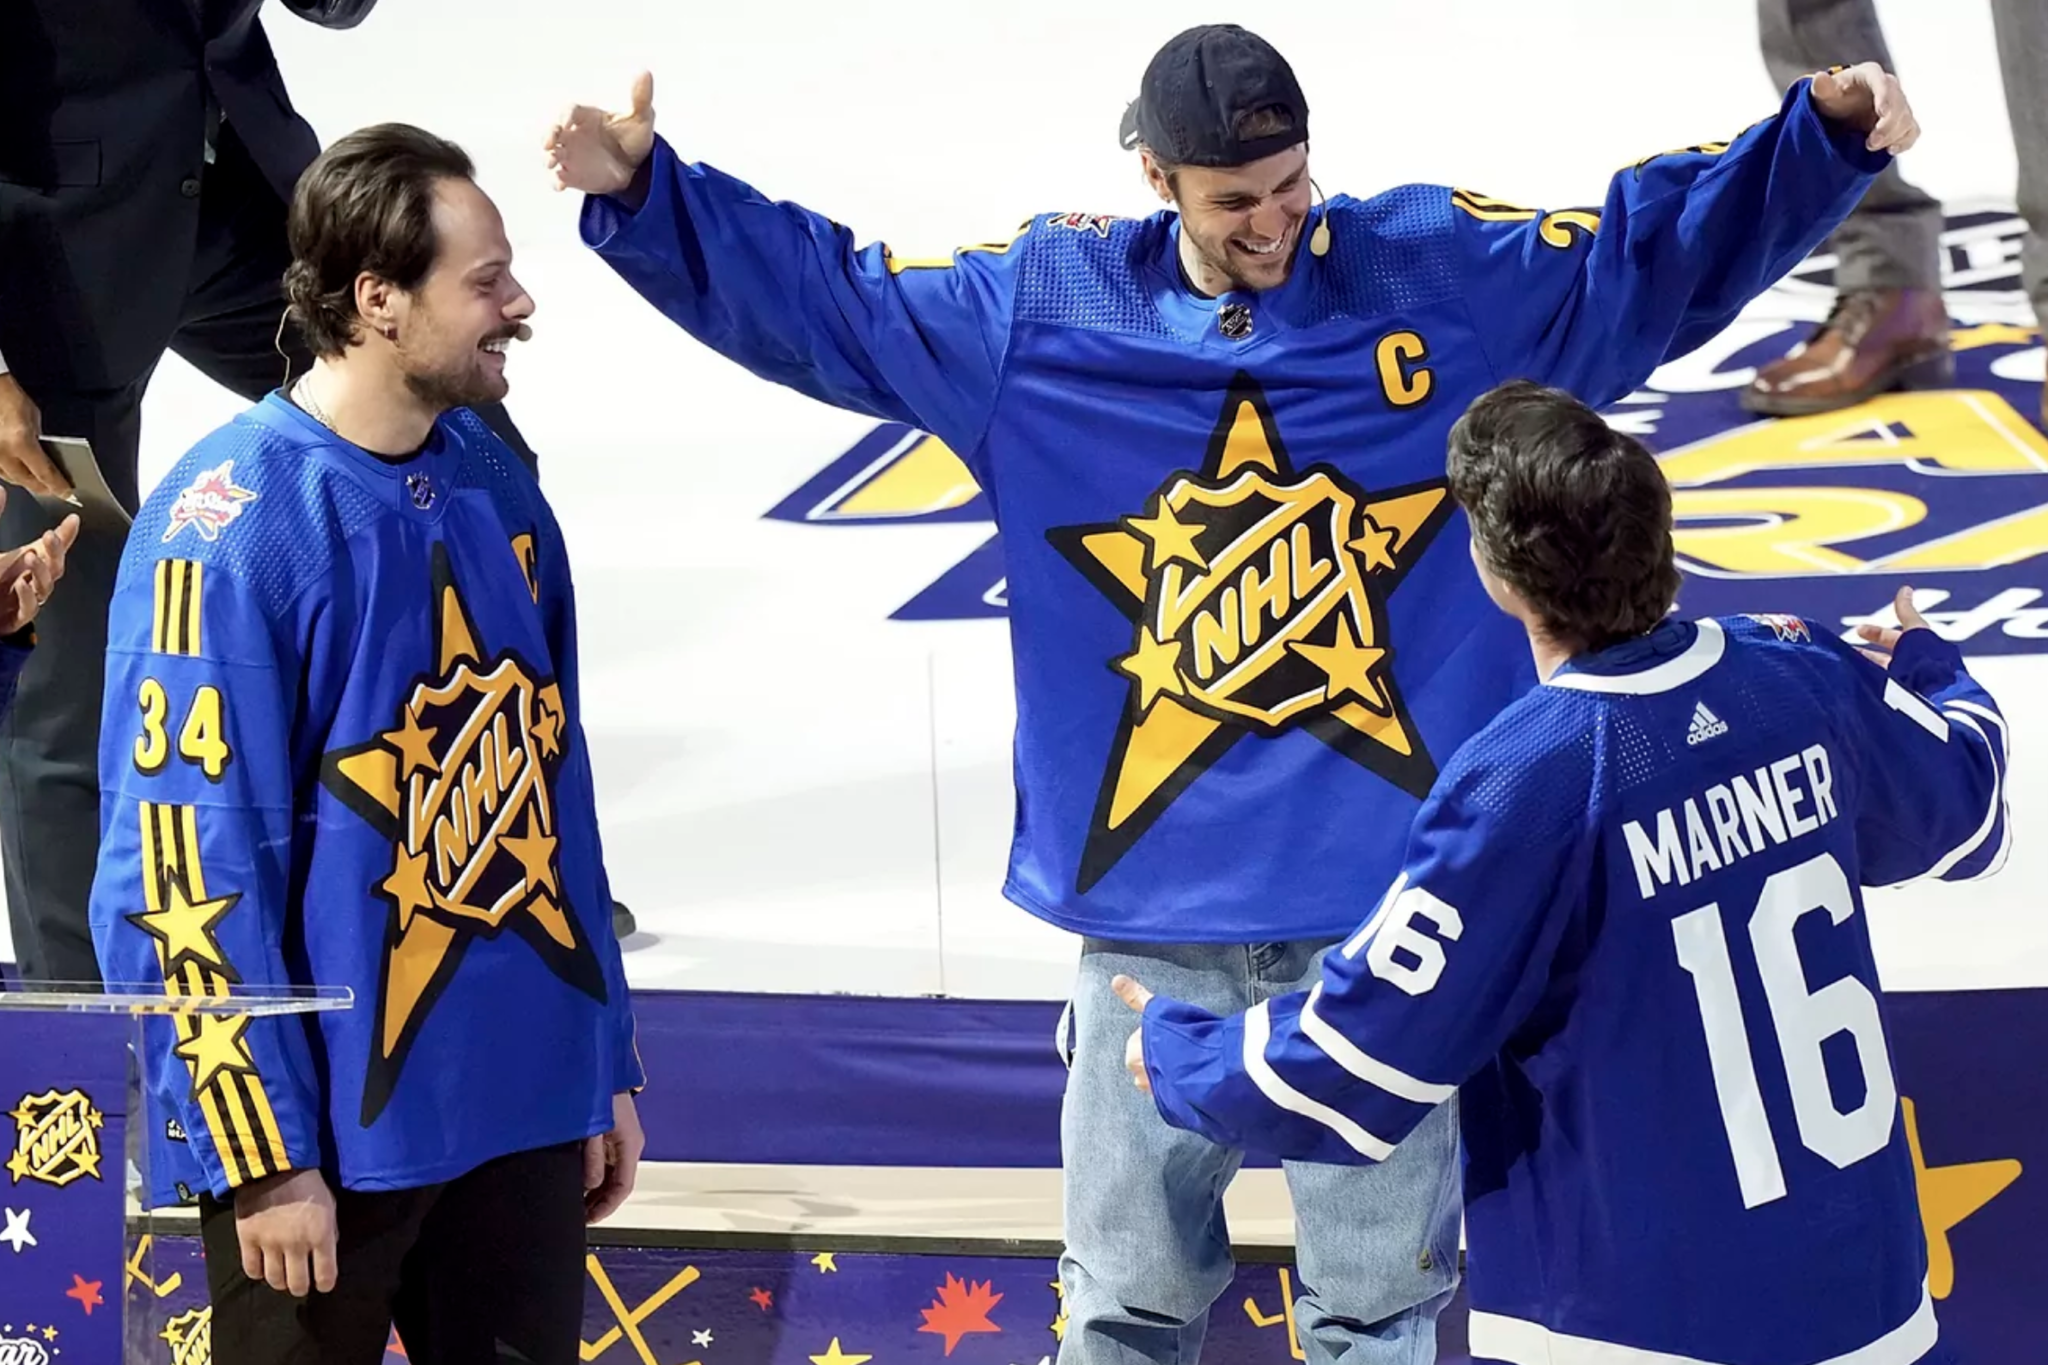 Justin Bieber fulfills his dream and causes a surprise at the NHL All-Star Game in a unique style